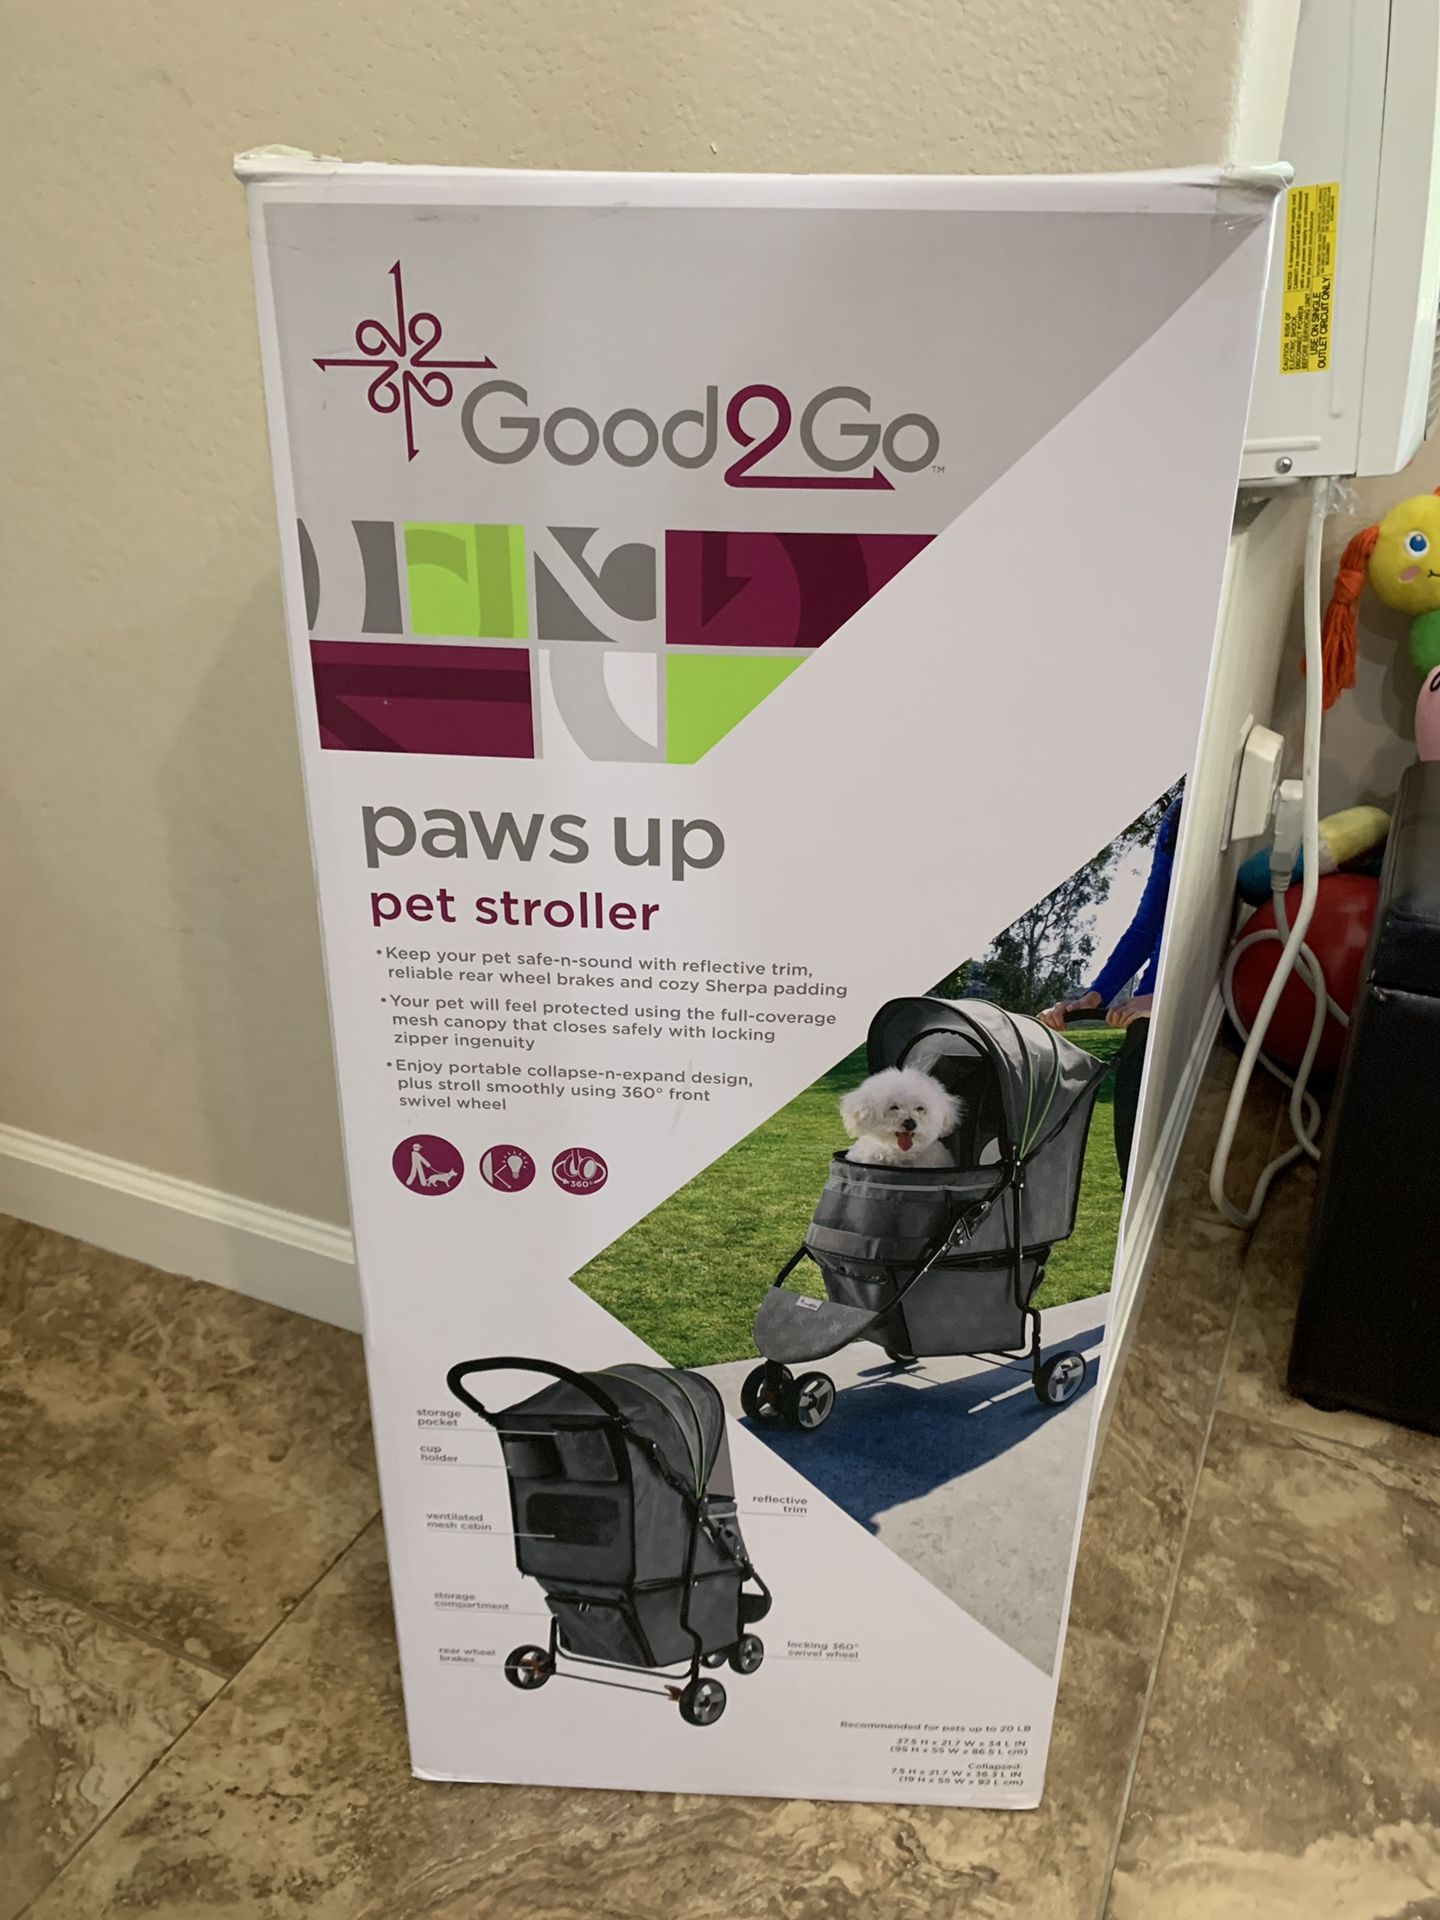 New Dog stroller for dogs up to 20lbs